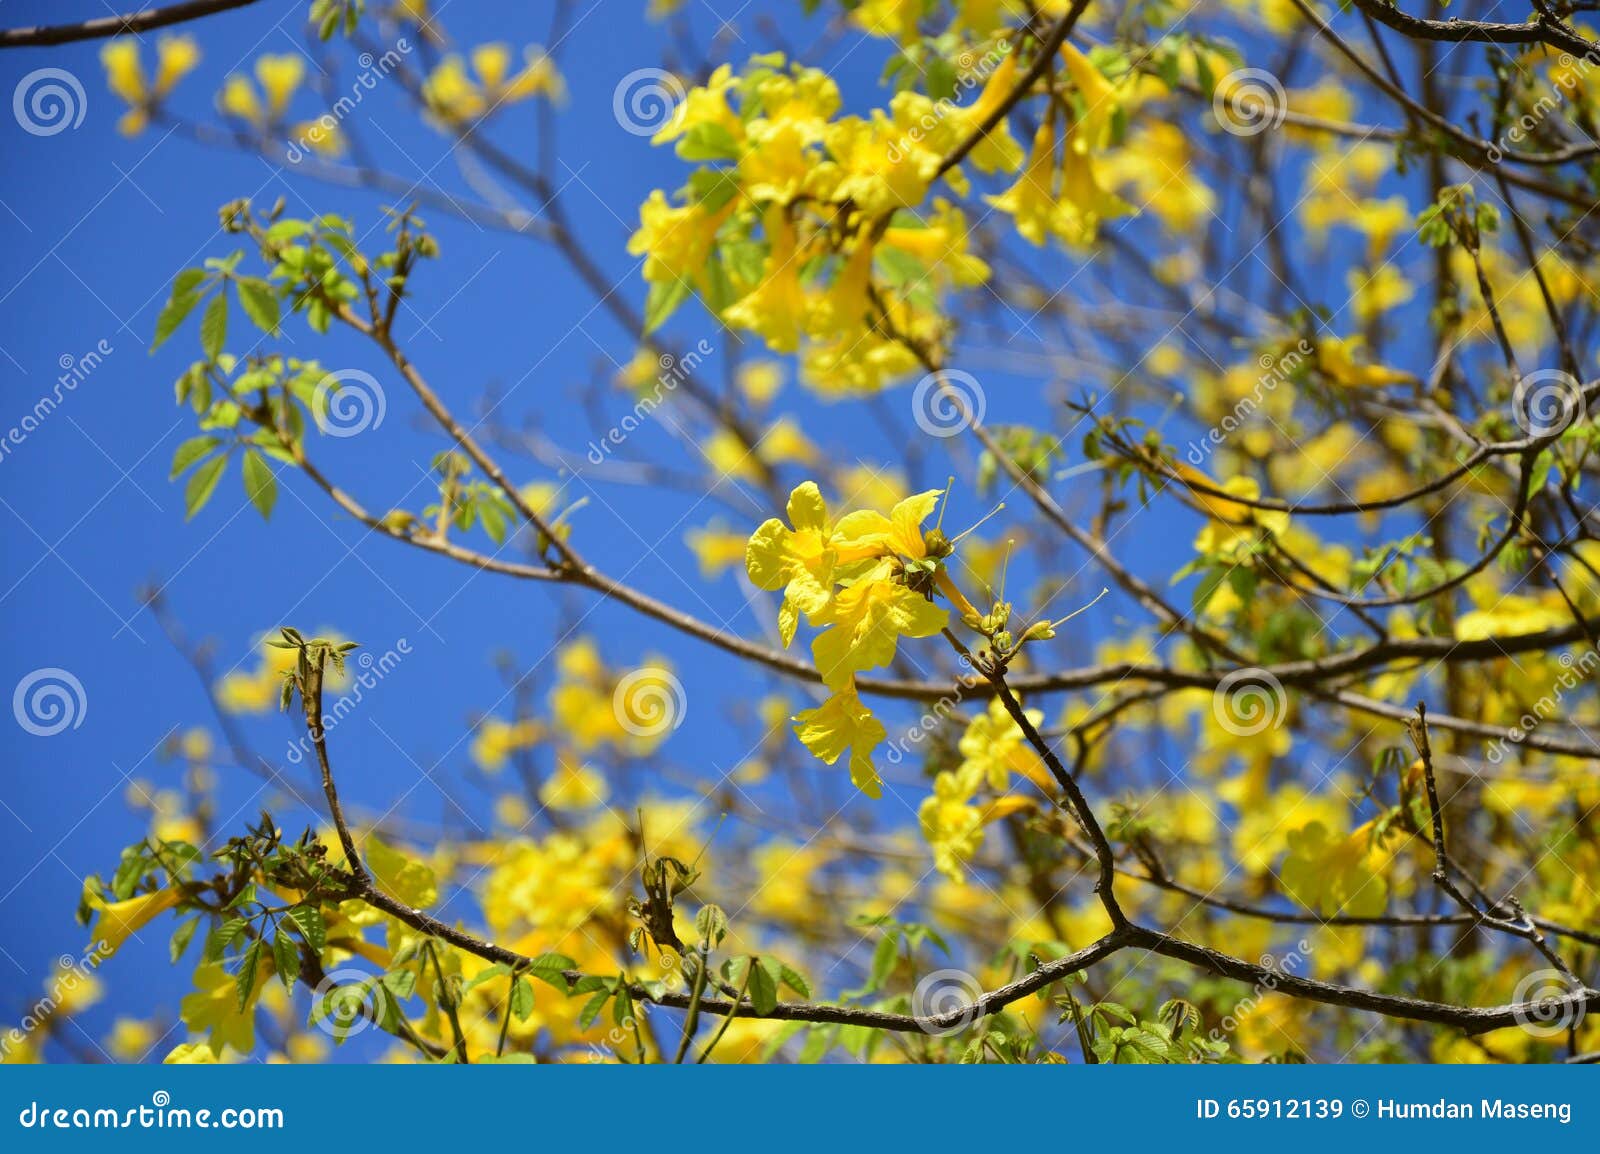 yellow tabebuia (roble) background focus in center